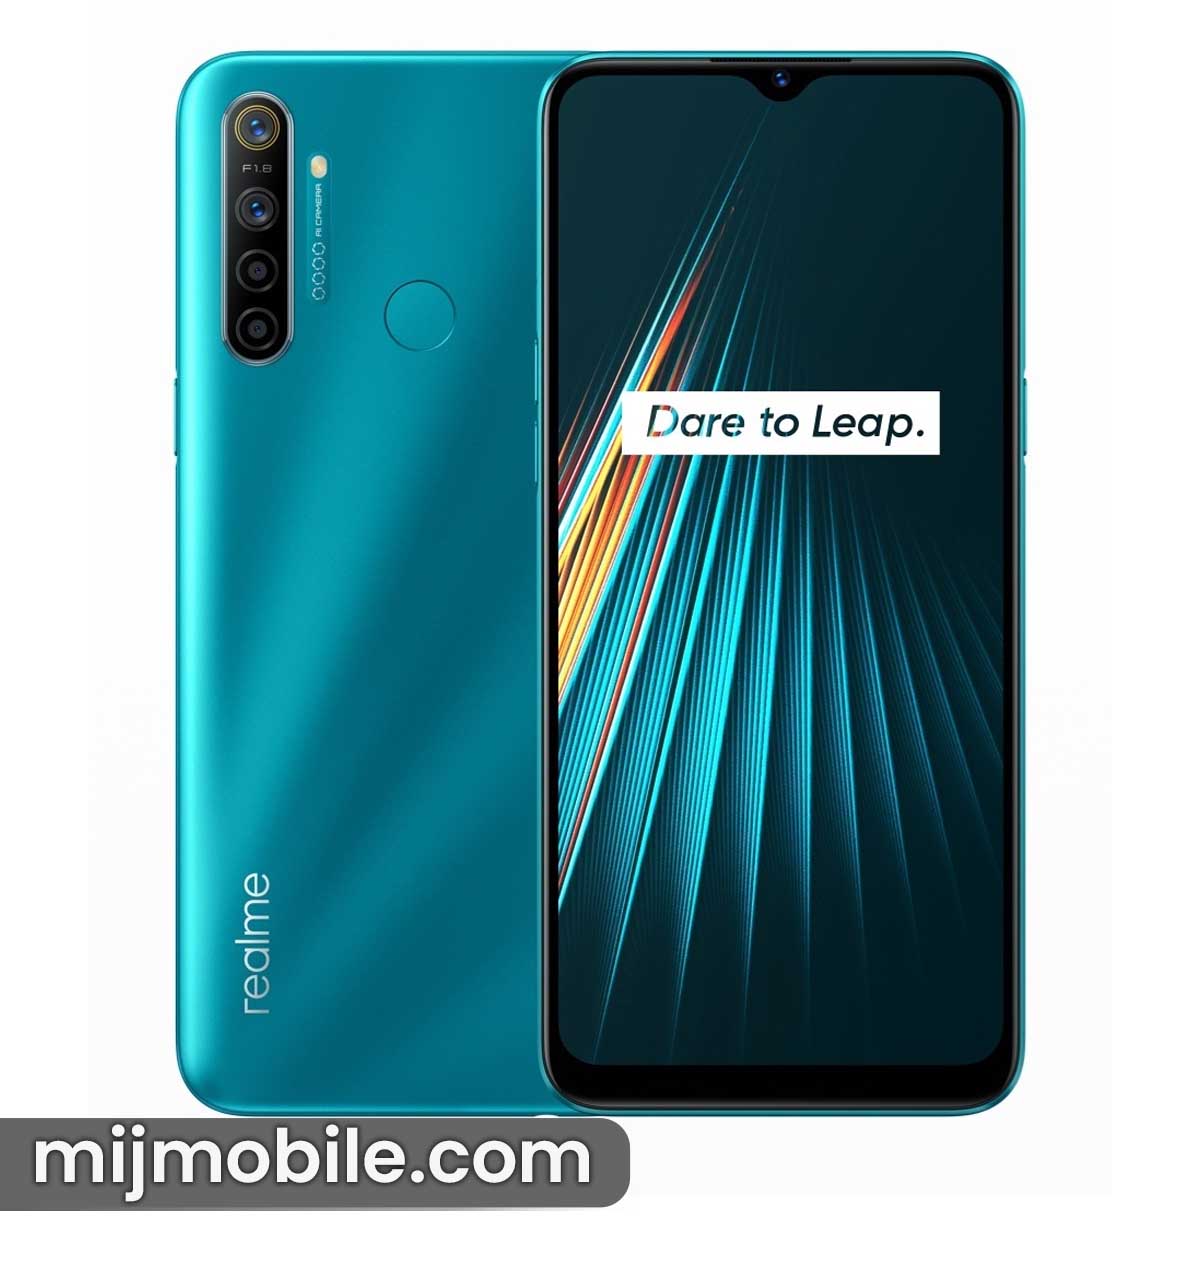 Realme 5i Price in Pakistan & Specifications Realme 5i Price in Pakistan is only 22,999.